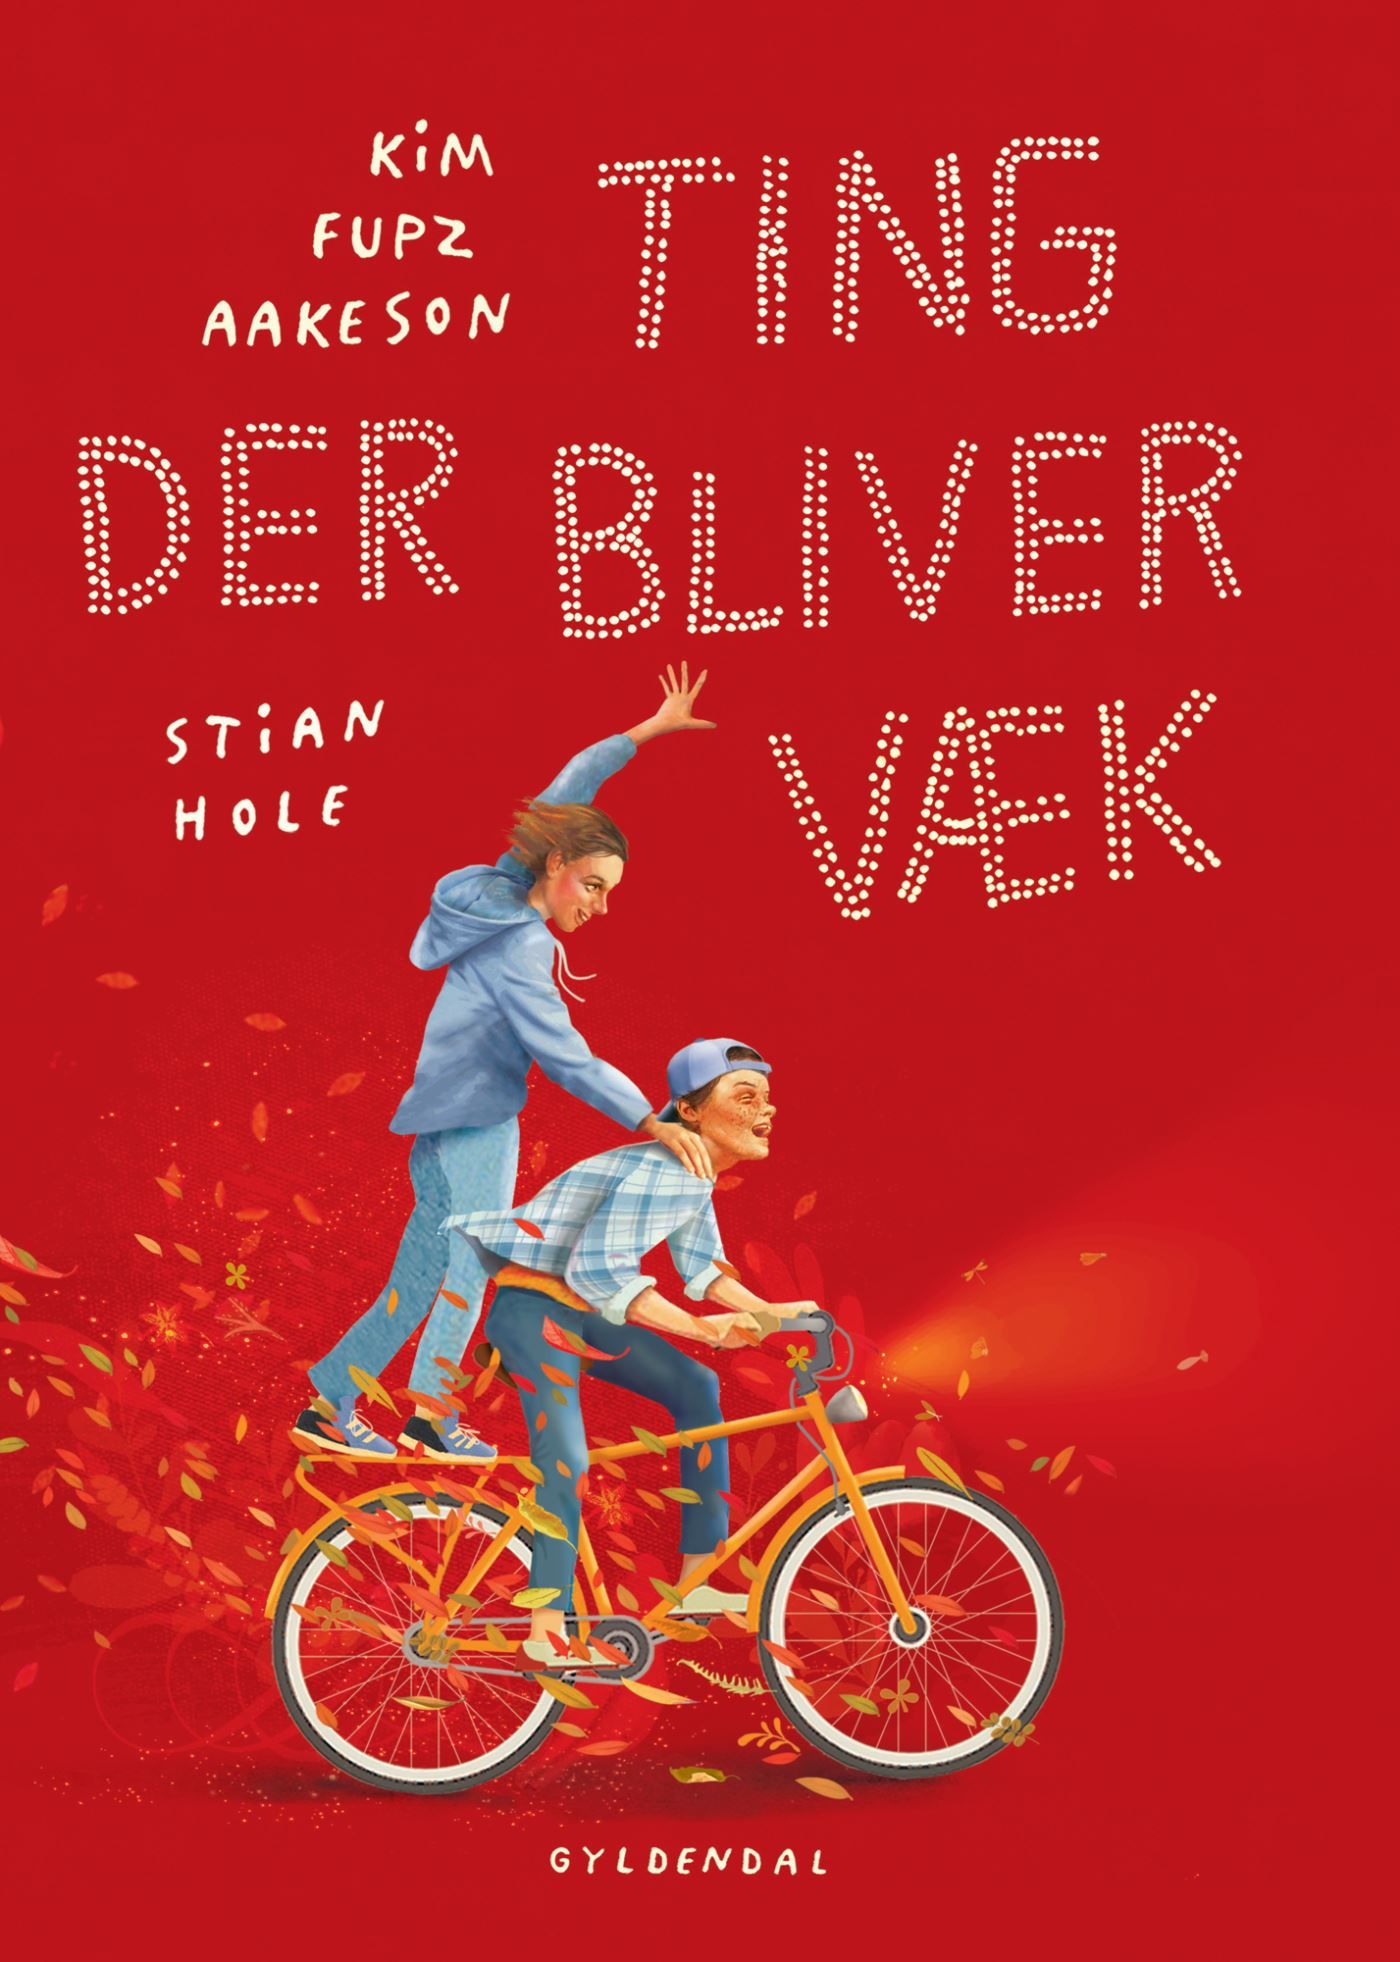 Ting der bliver væk, eBook by Stian Hole, Kim Fupz Aakeson